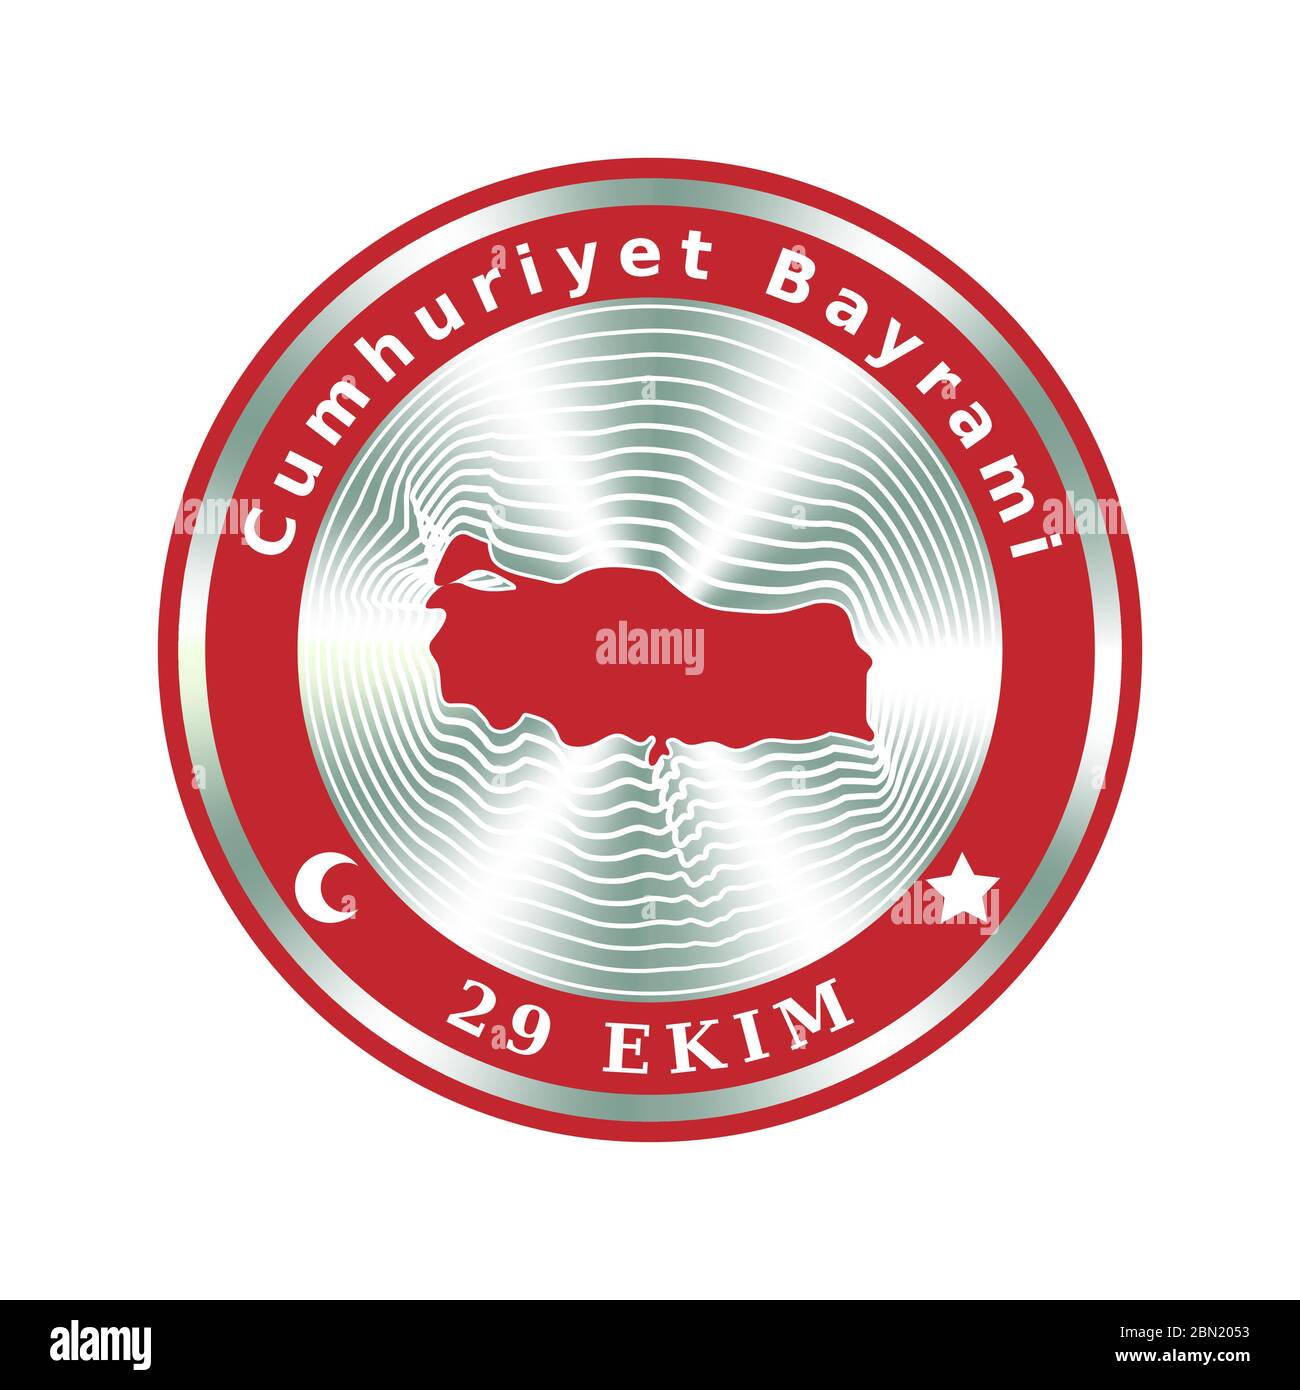 Cumhuriyet Bayrami, 29 ekim. 29 october Republic Day of Turkey. Event icon or badge with map, flag and silver holographic design for Turkish National Stock Vector